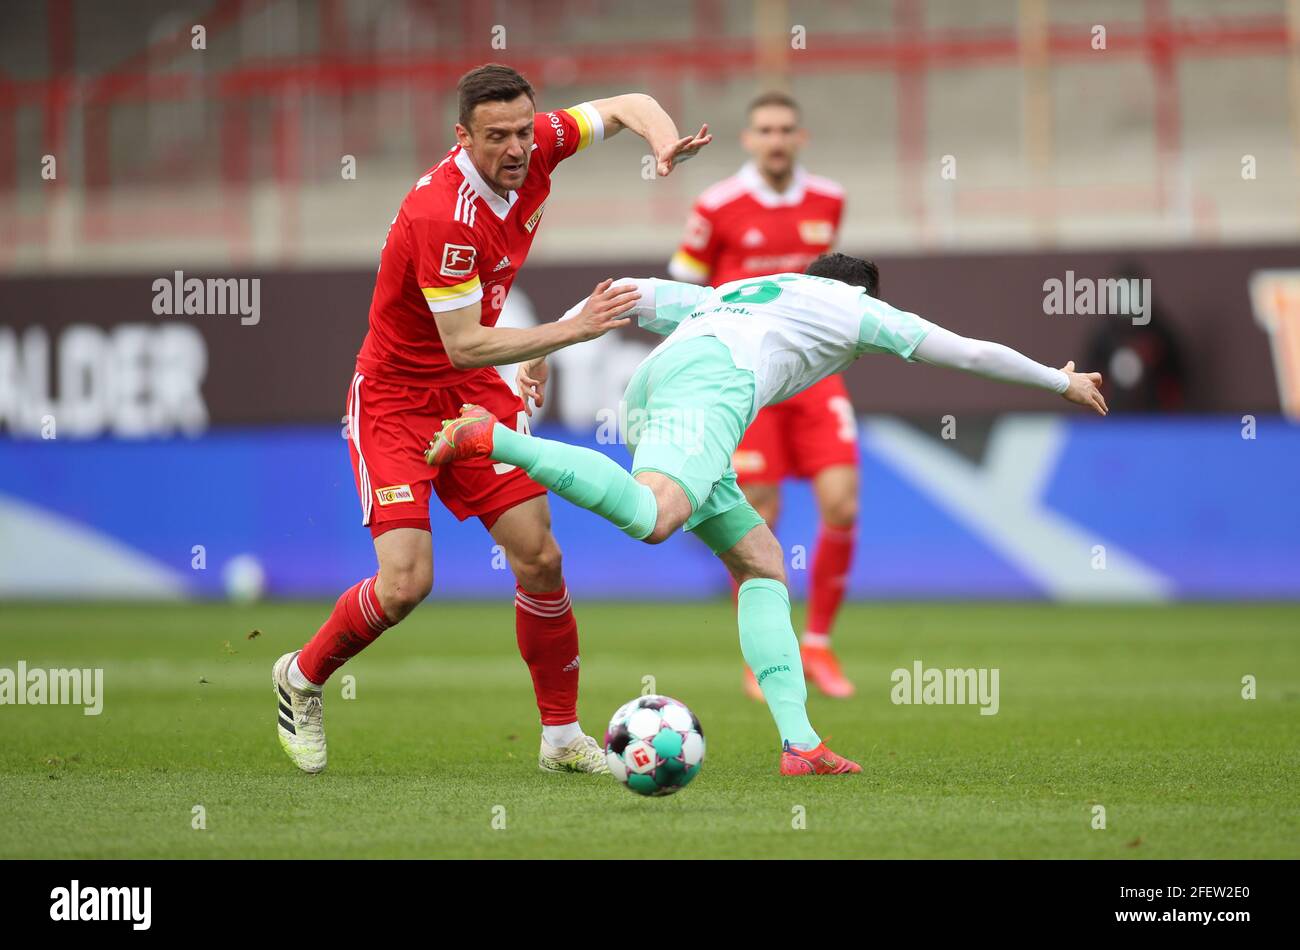 Berlin, Germany. 24th Apr, 2021. Football: Bundesliga, 1. FC Union Berlin - Werder Bremen, Matchday 31 at Stadion An der Alten Försterei. Union's Christian Gentner (l) and Bremen's Kevin Möhwald fight for the ball. IMPORTANT NOTE: In accordance with the regulations of the DFL Deutsche Fußball Liga and the DFB Deutscher Fußball-Bund, it is prohibited to use or have used photographs taken in the stadium and/or of the match in the form of sequence pictures and/or video-like photo series. Credit: Andreas Gora/dpa-Pool/dpa/Alamy Live News Stock Photo